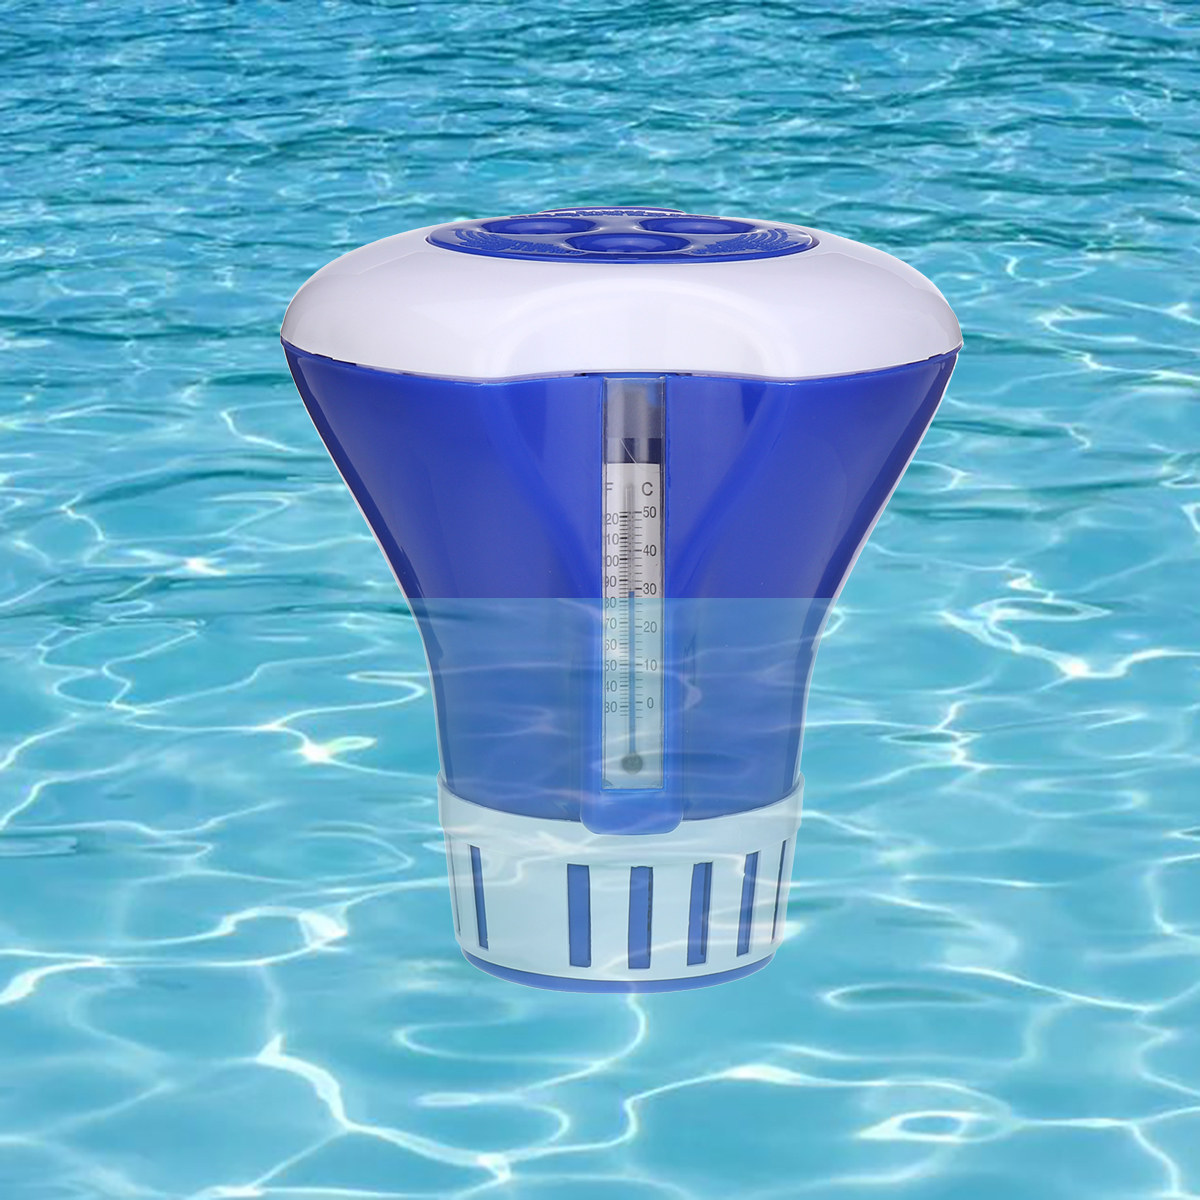 Pool-Floating-Chemical-Dispenser-High-Quality-Durable-With-Thermometer-for-Swimming-Pool-Cheaning-To-1762946-1